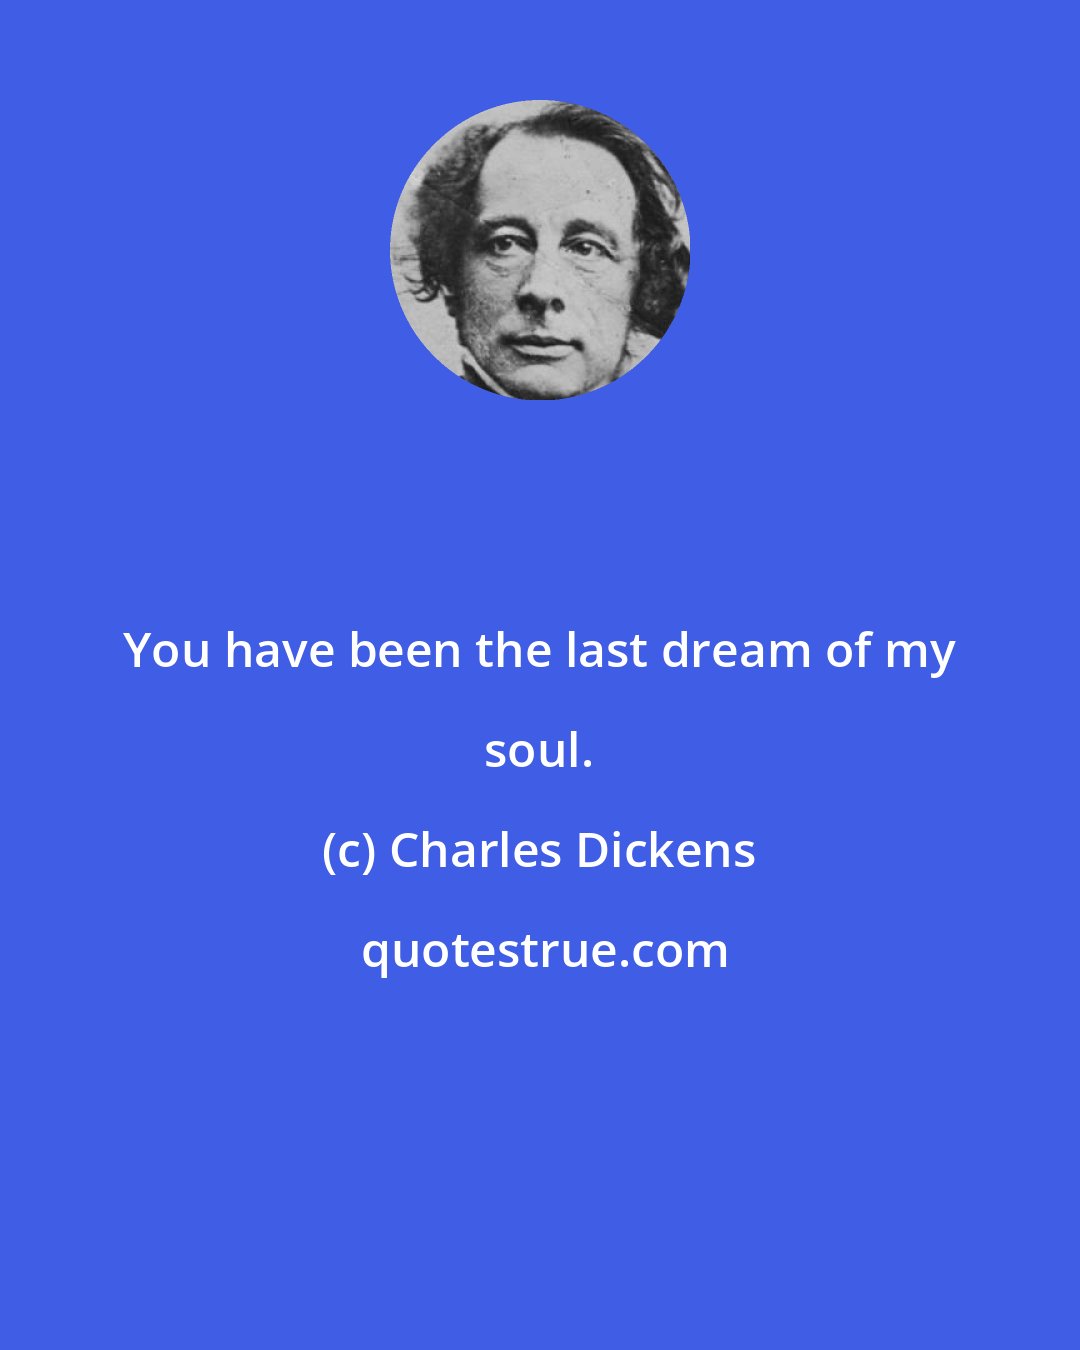 Charles Dickens: You have been the last dream of my soul.